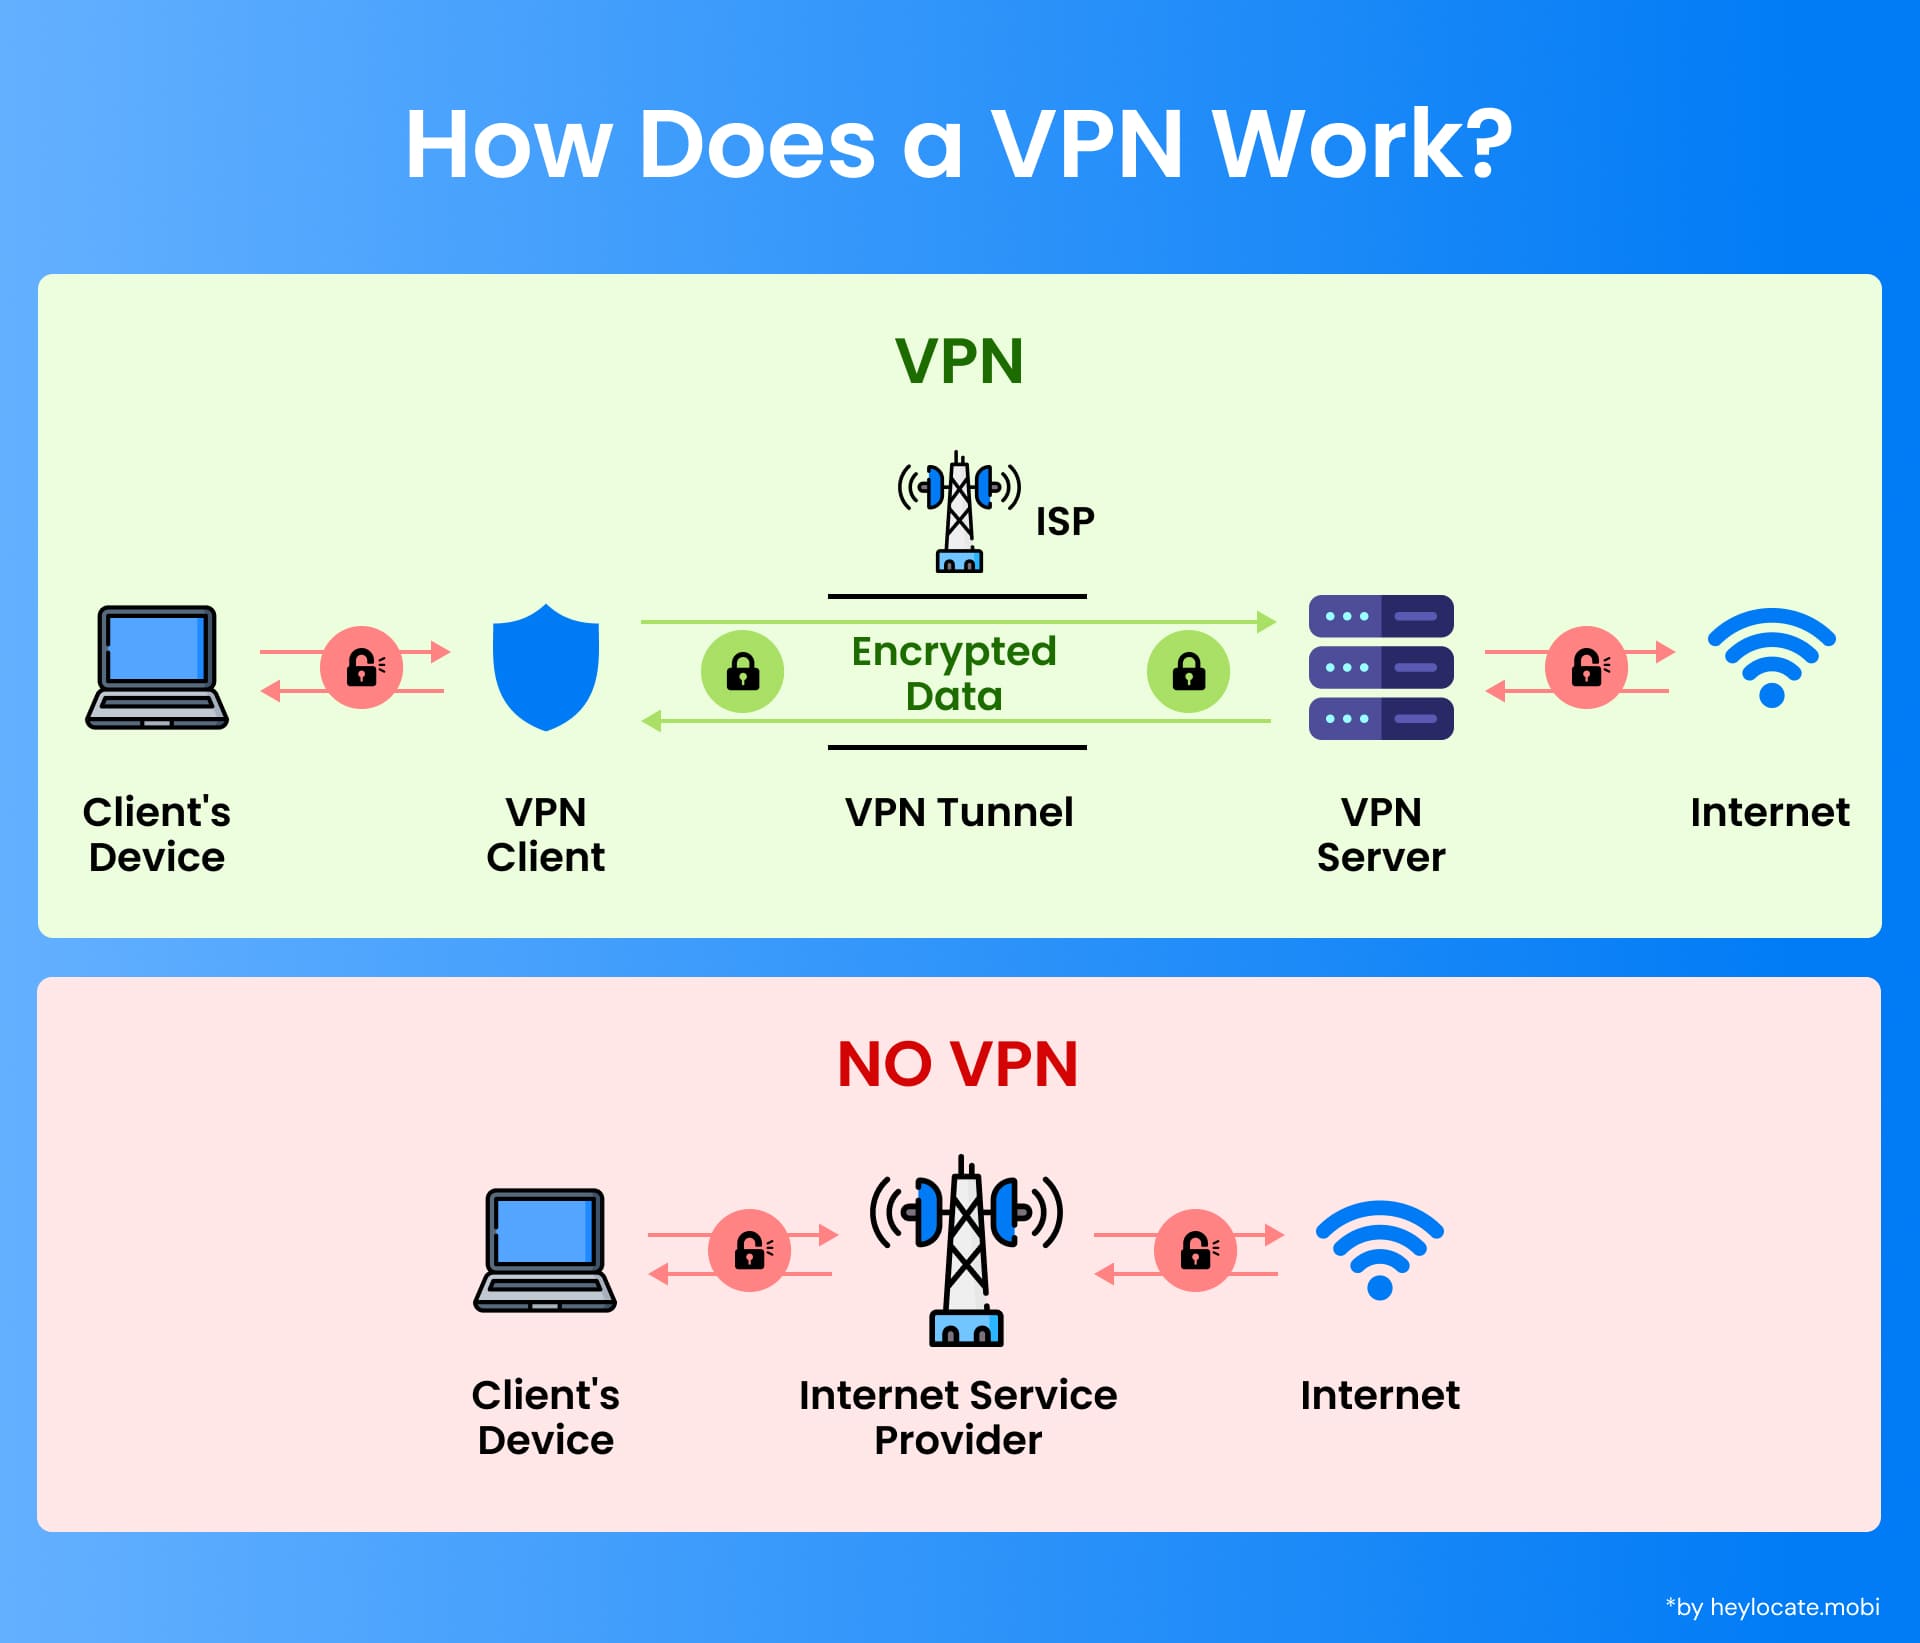 Infographic showing the data encryption and routing process of a VPN compared to a direct internet connection